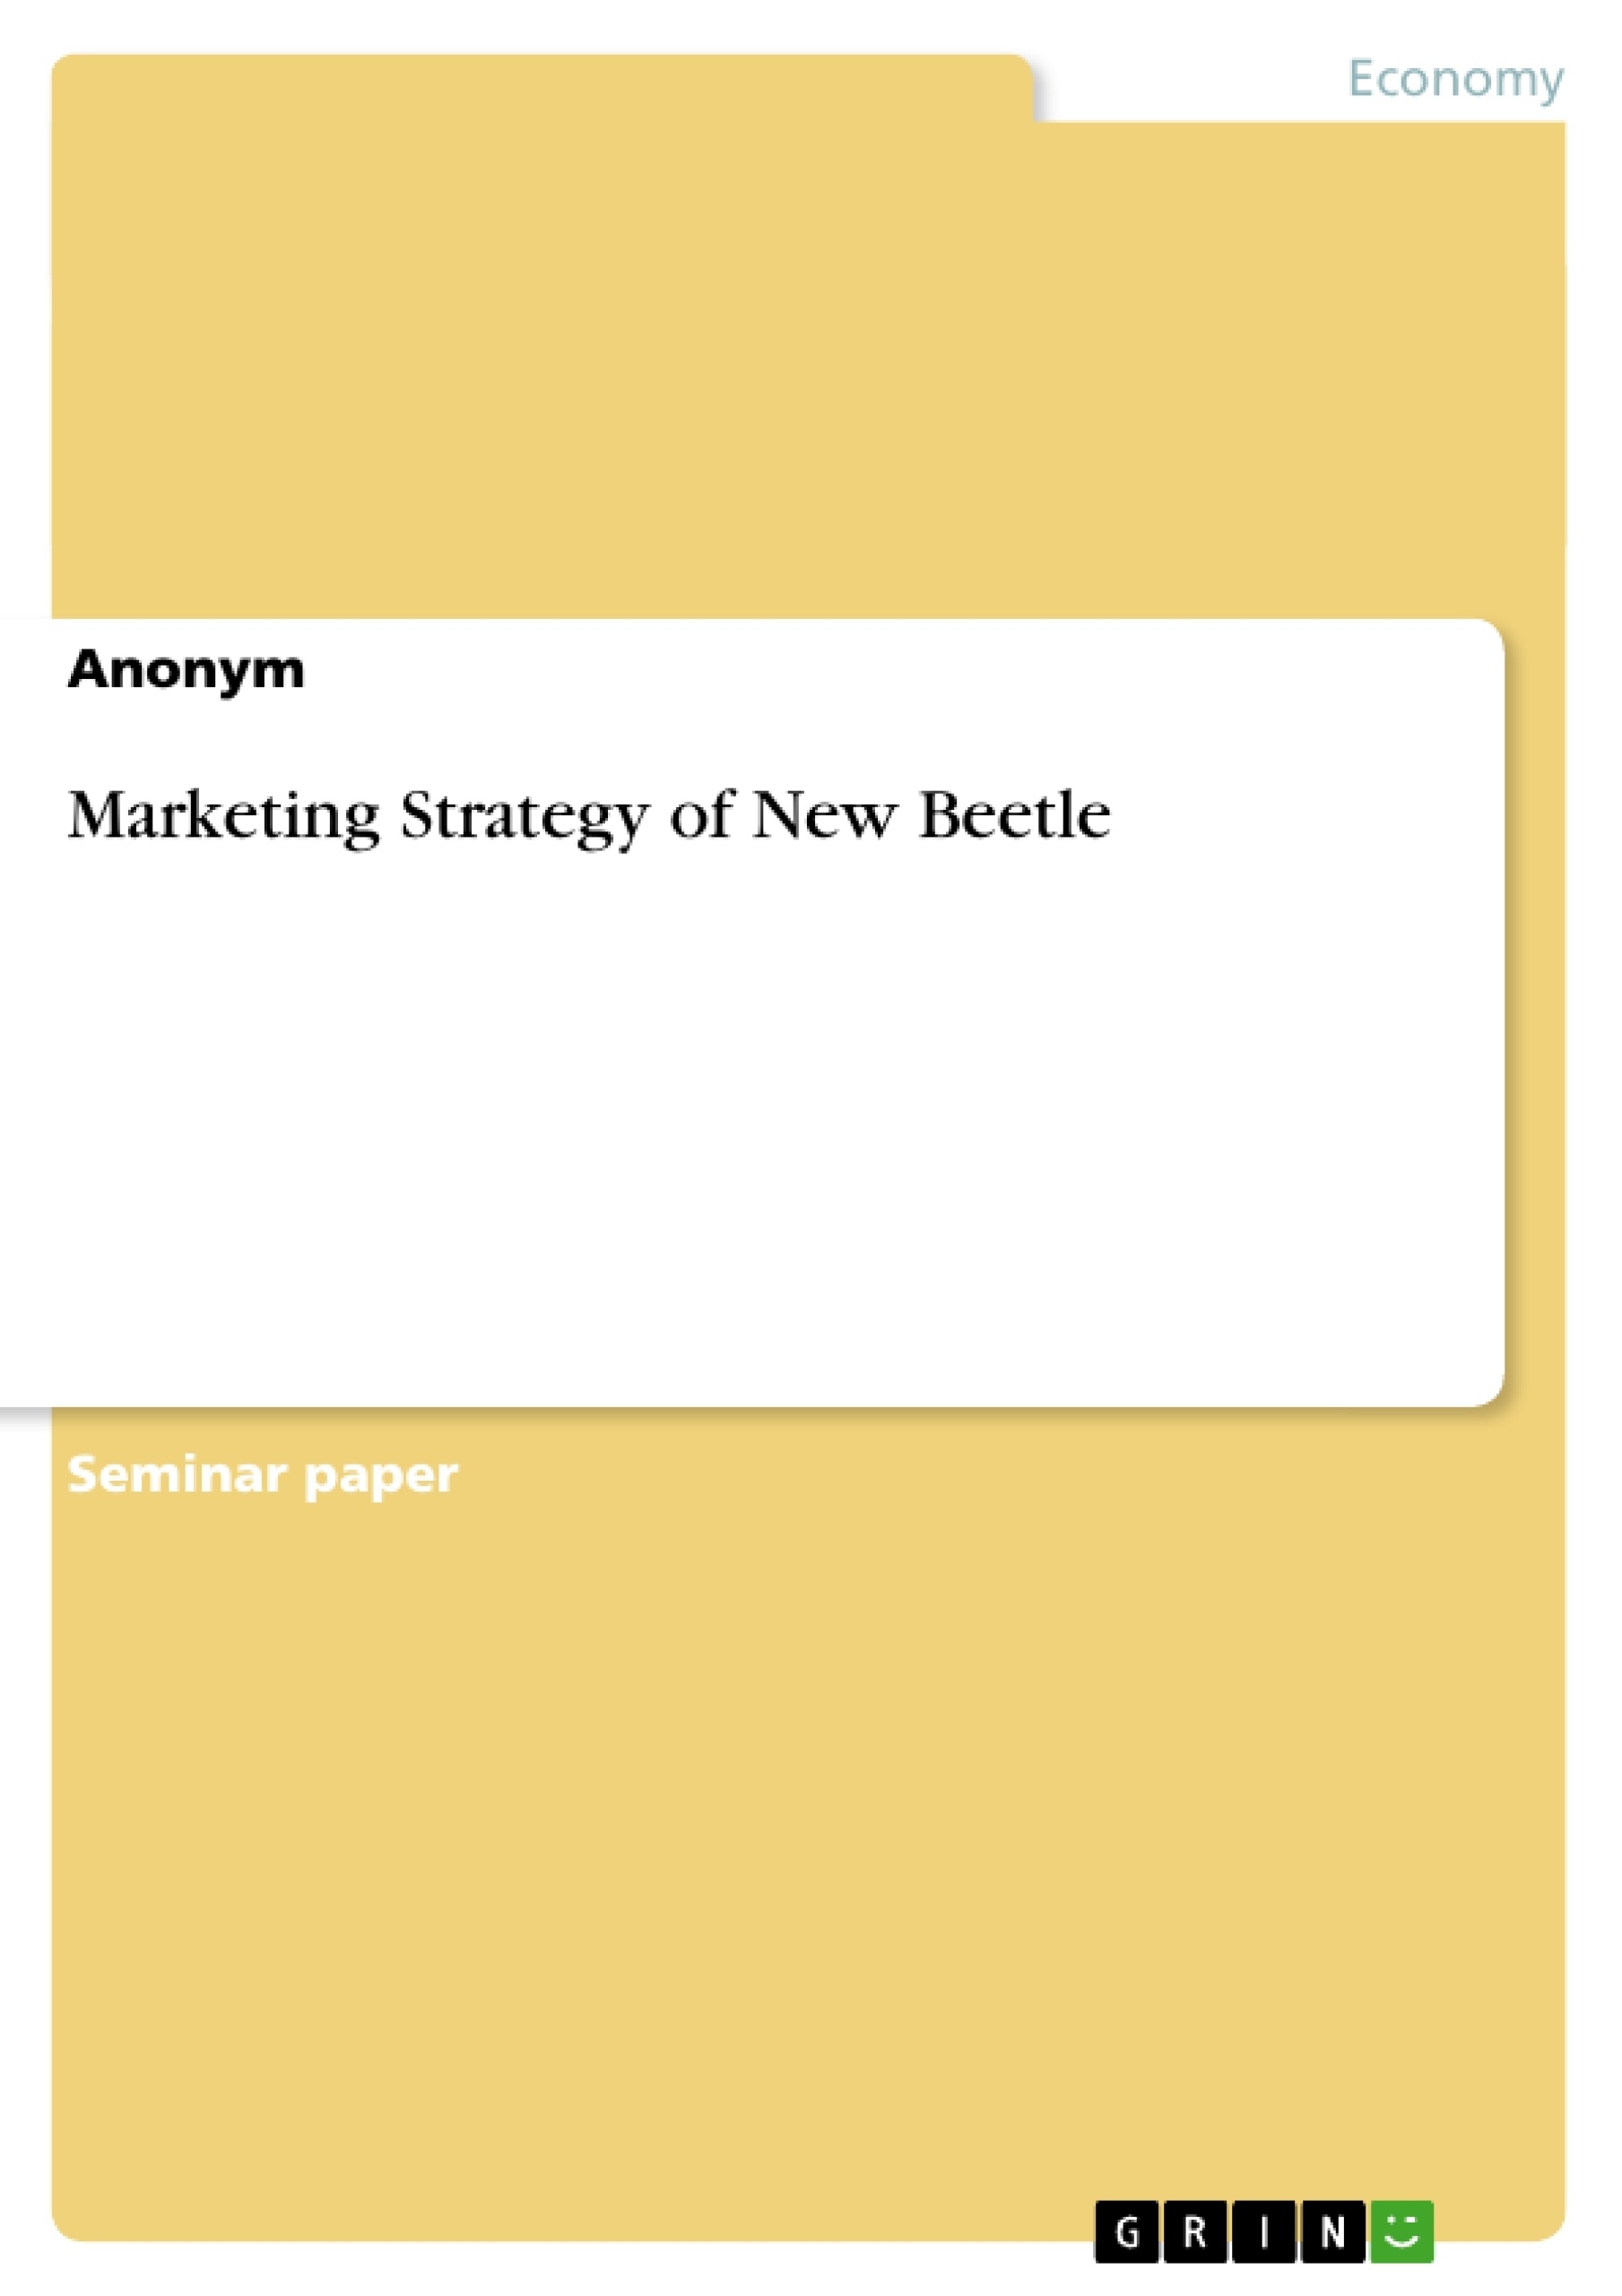 Title: Marketing Strategy of New Beetle